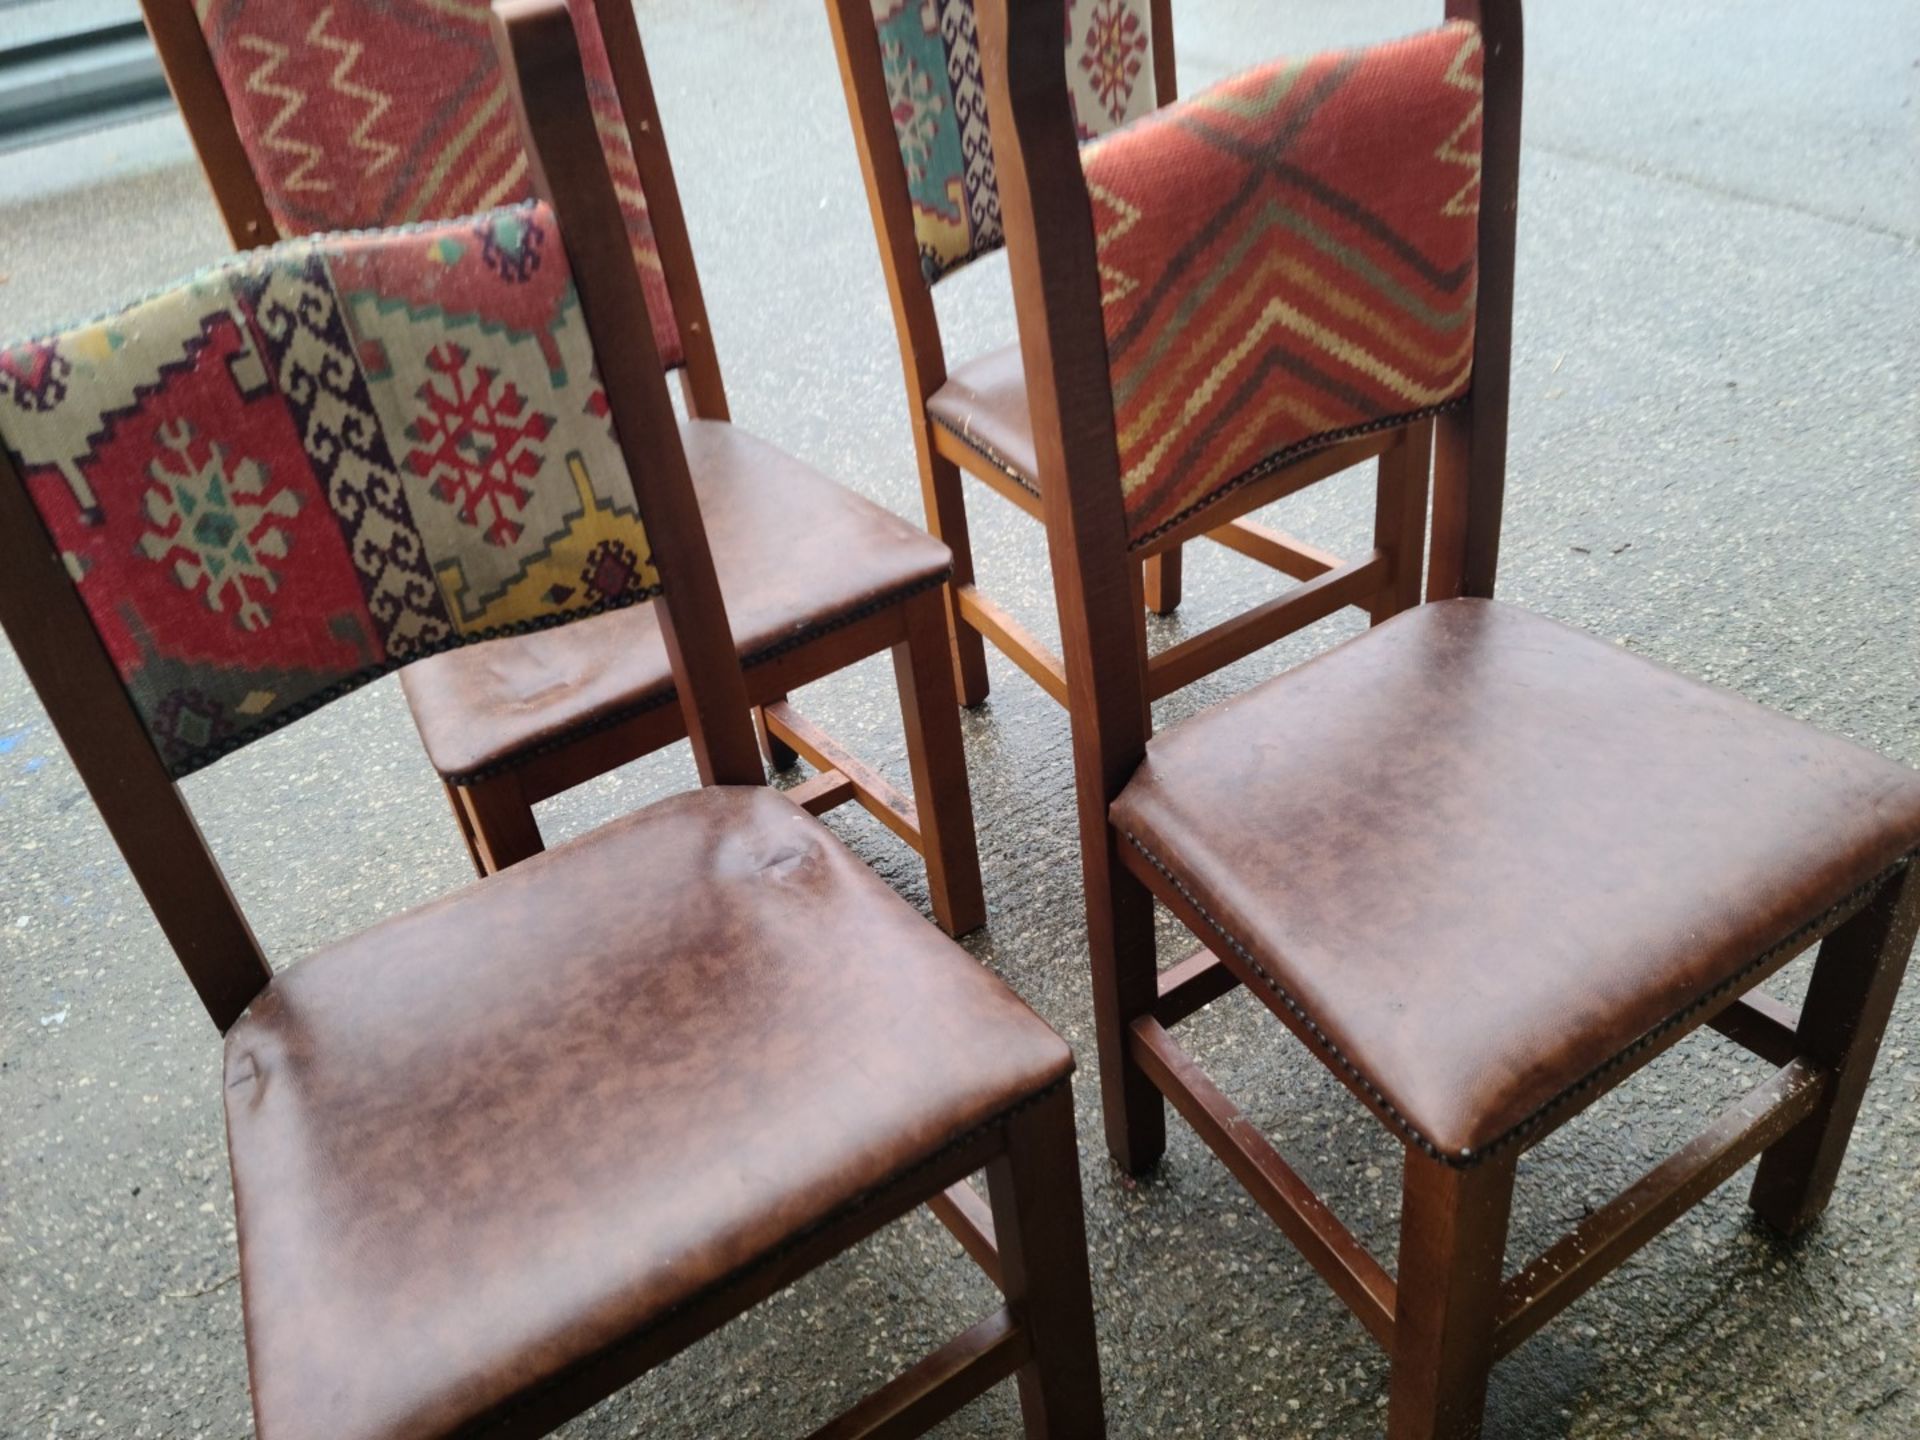 Set Of 4 x Aztec Print Dining Chairs With Faux Brown Leather Seating & Studded Seams - Image 4 of 5